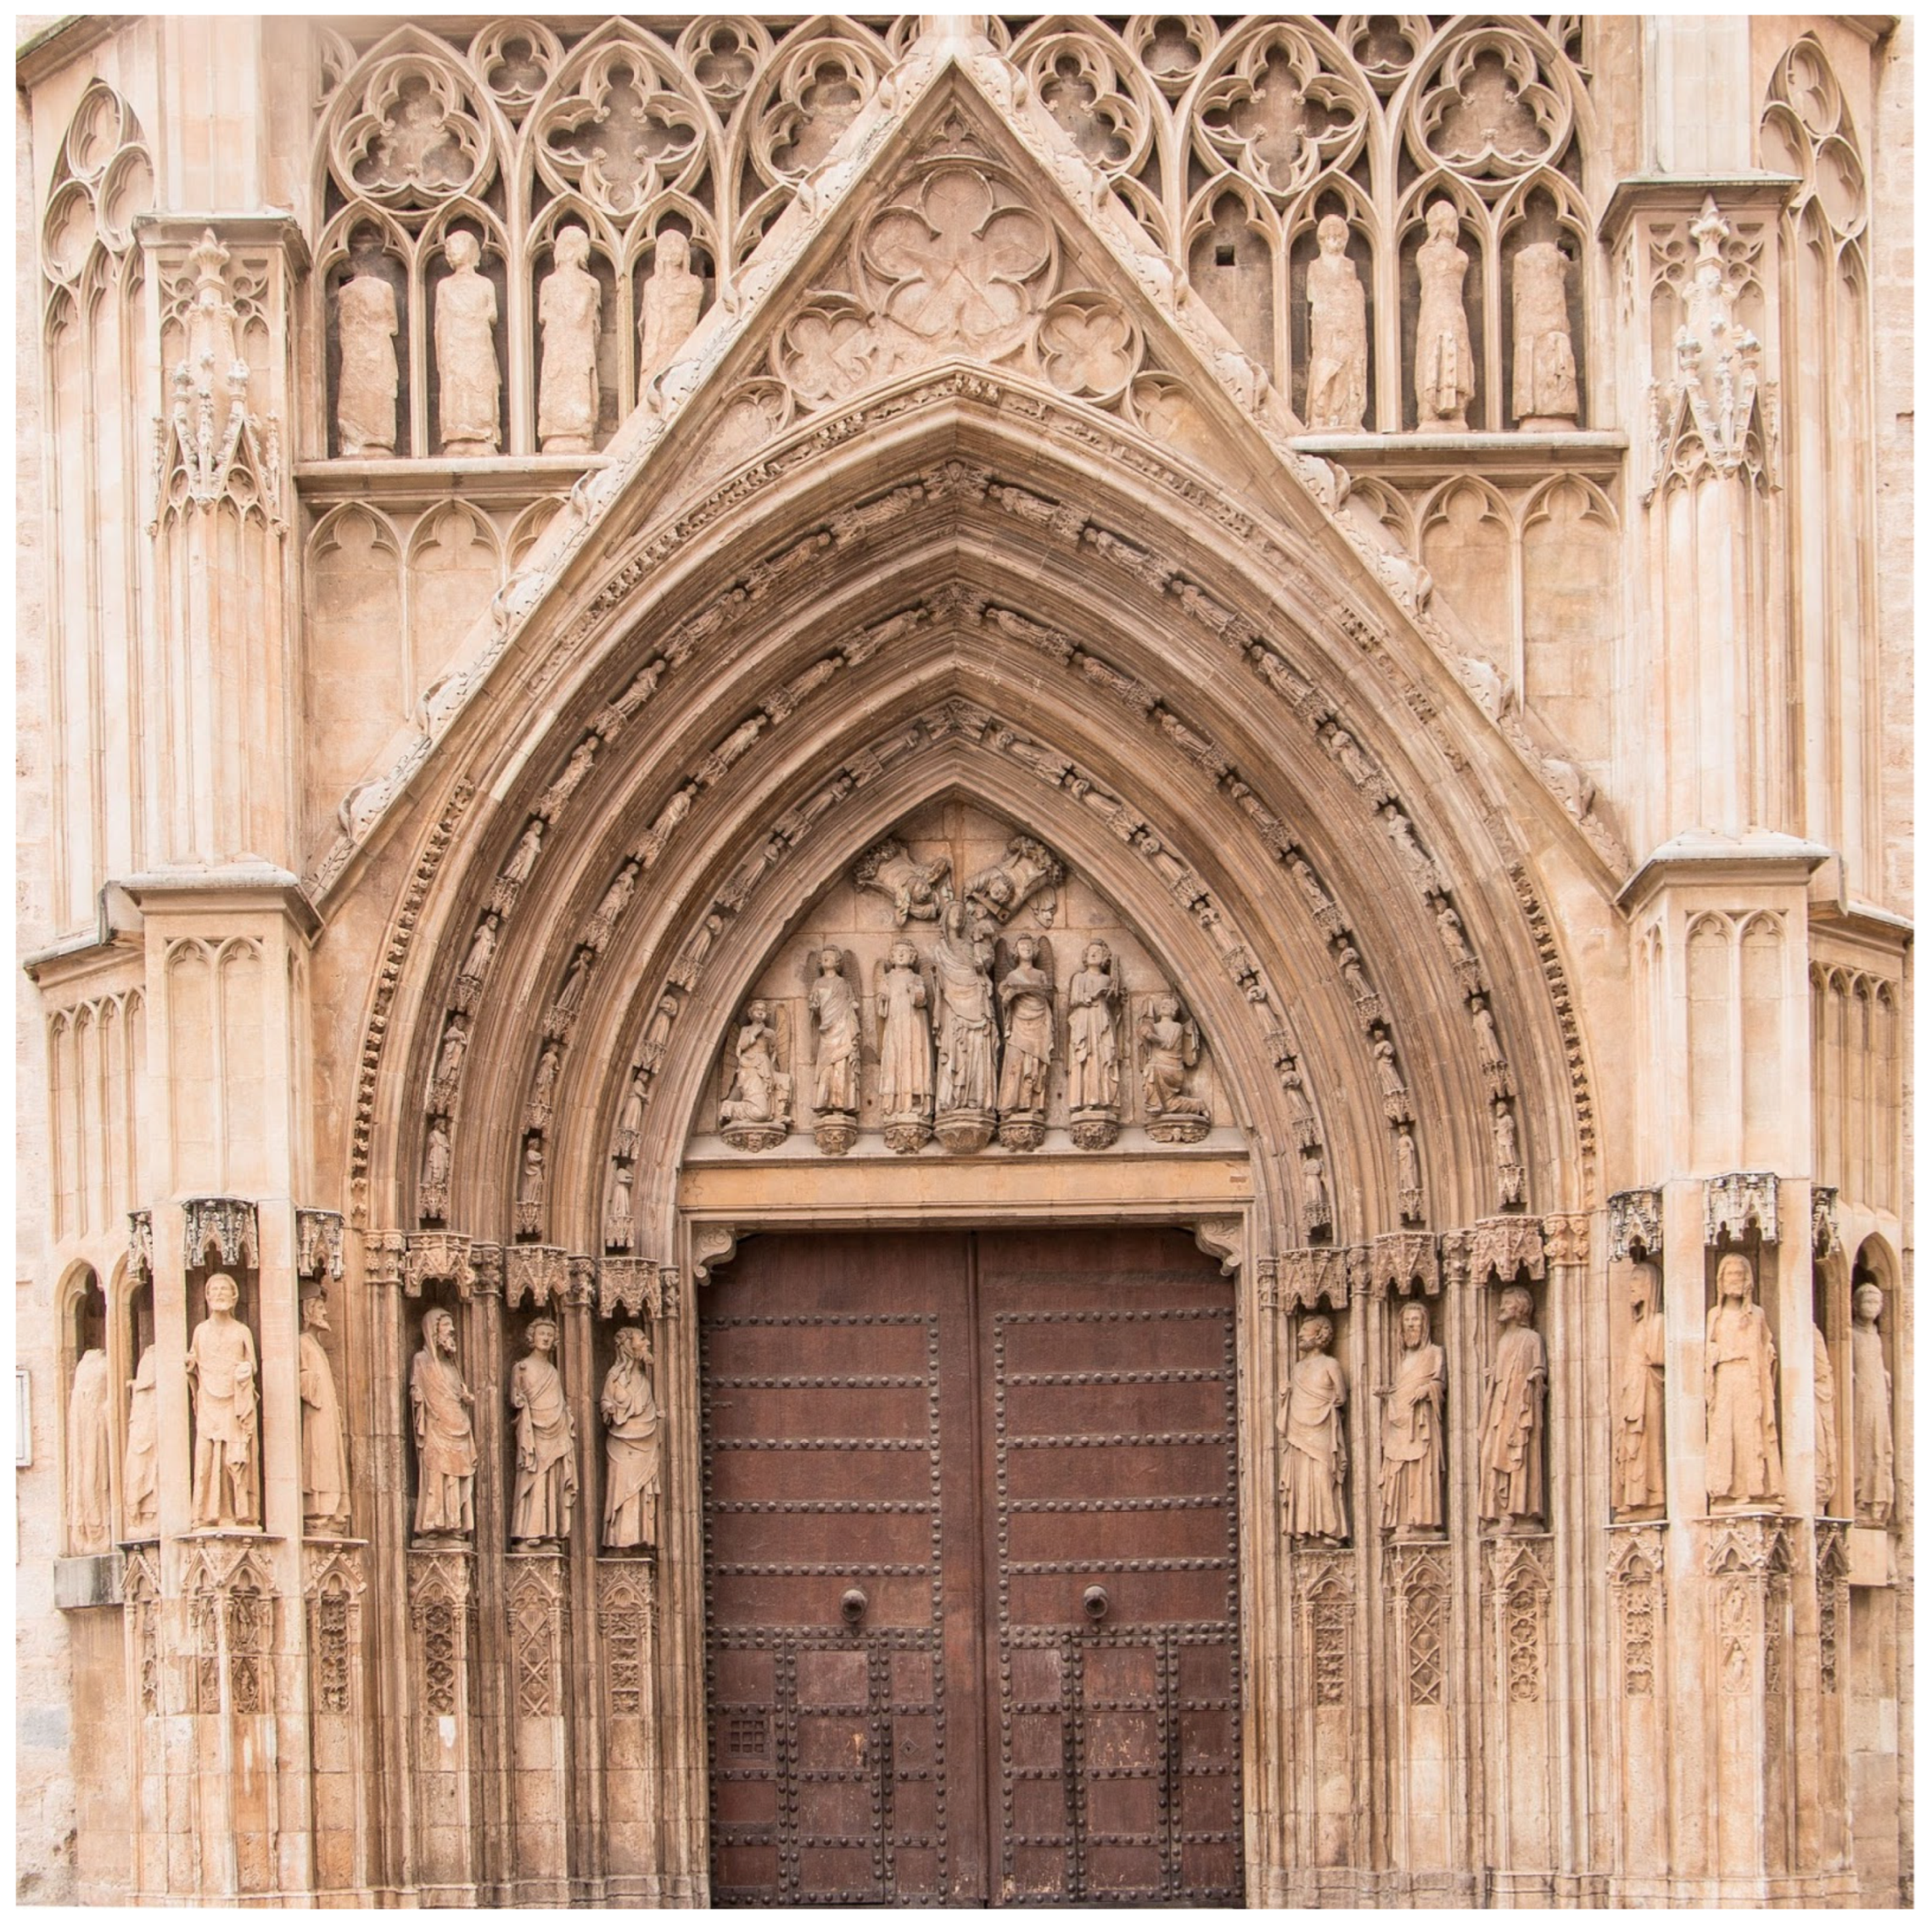 Religions | Free Full-Text | Virgin Mary as the “Gate of  Heaven” with Angelic Musicians in the Doorway of the Apostles at the  Cathedral of Valencia